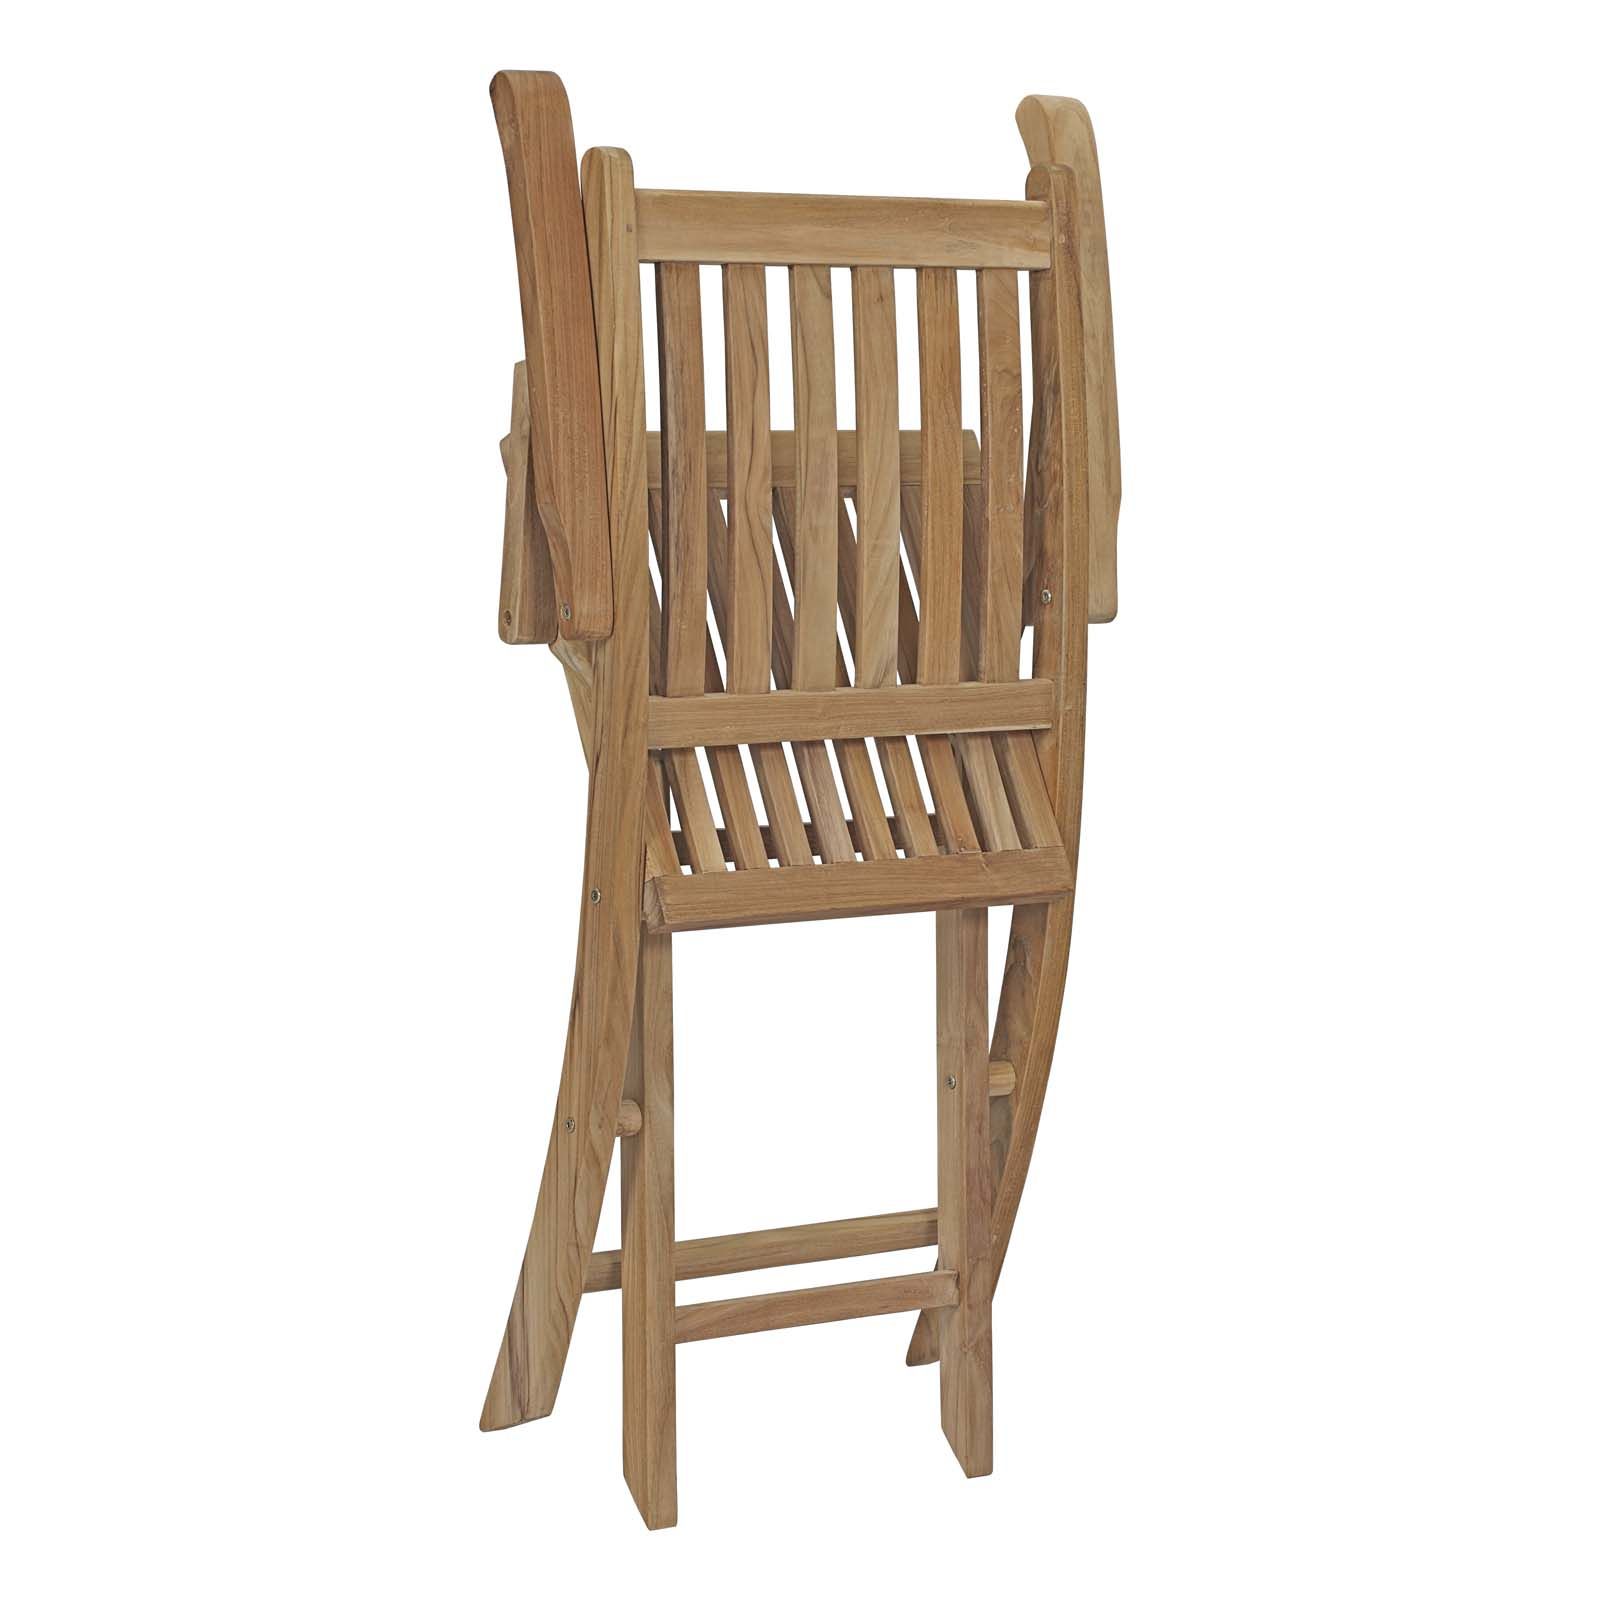 Teak Outdoor Folding Armchairs For Most Popular Marina Outdoor Patio Teak Folding Chair Natural Arm Chair (View 10 of 15)